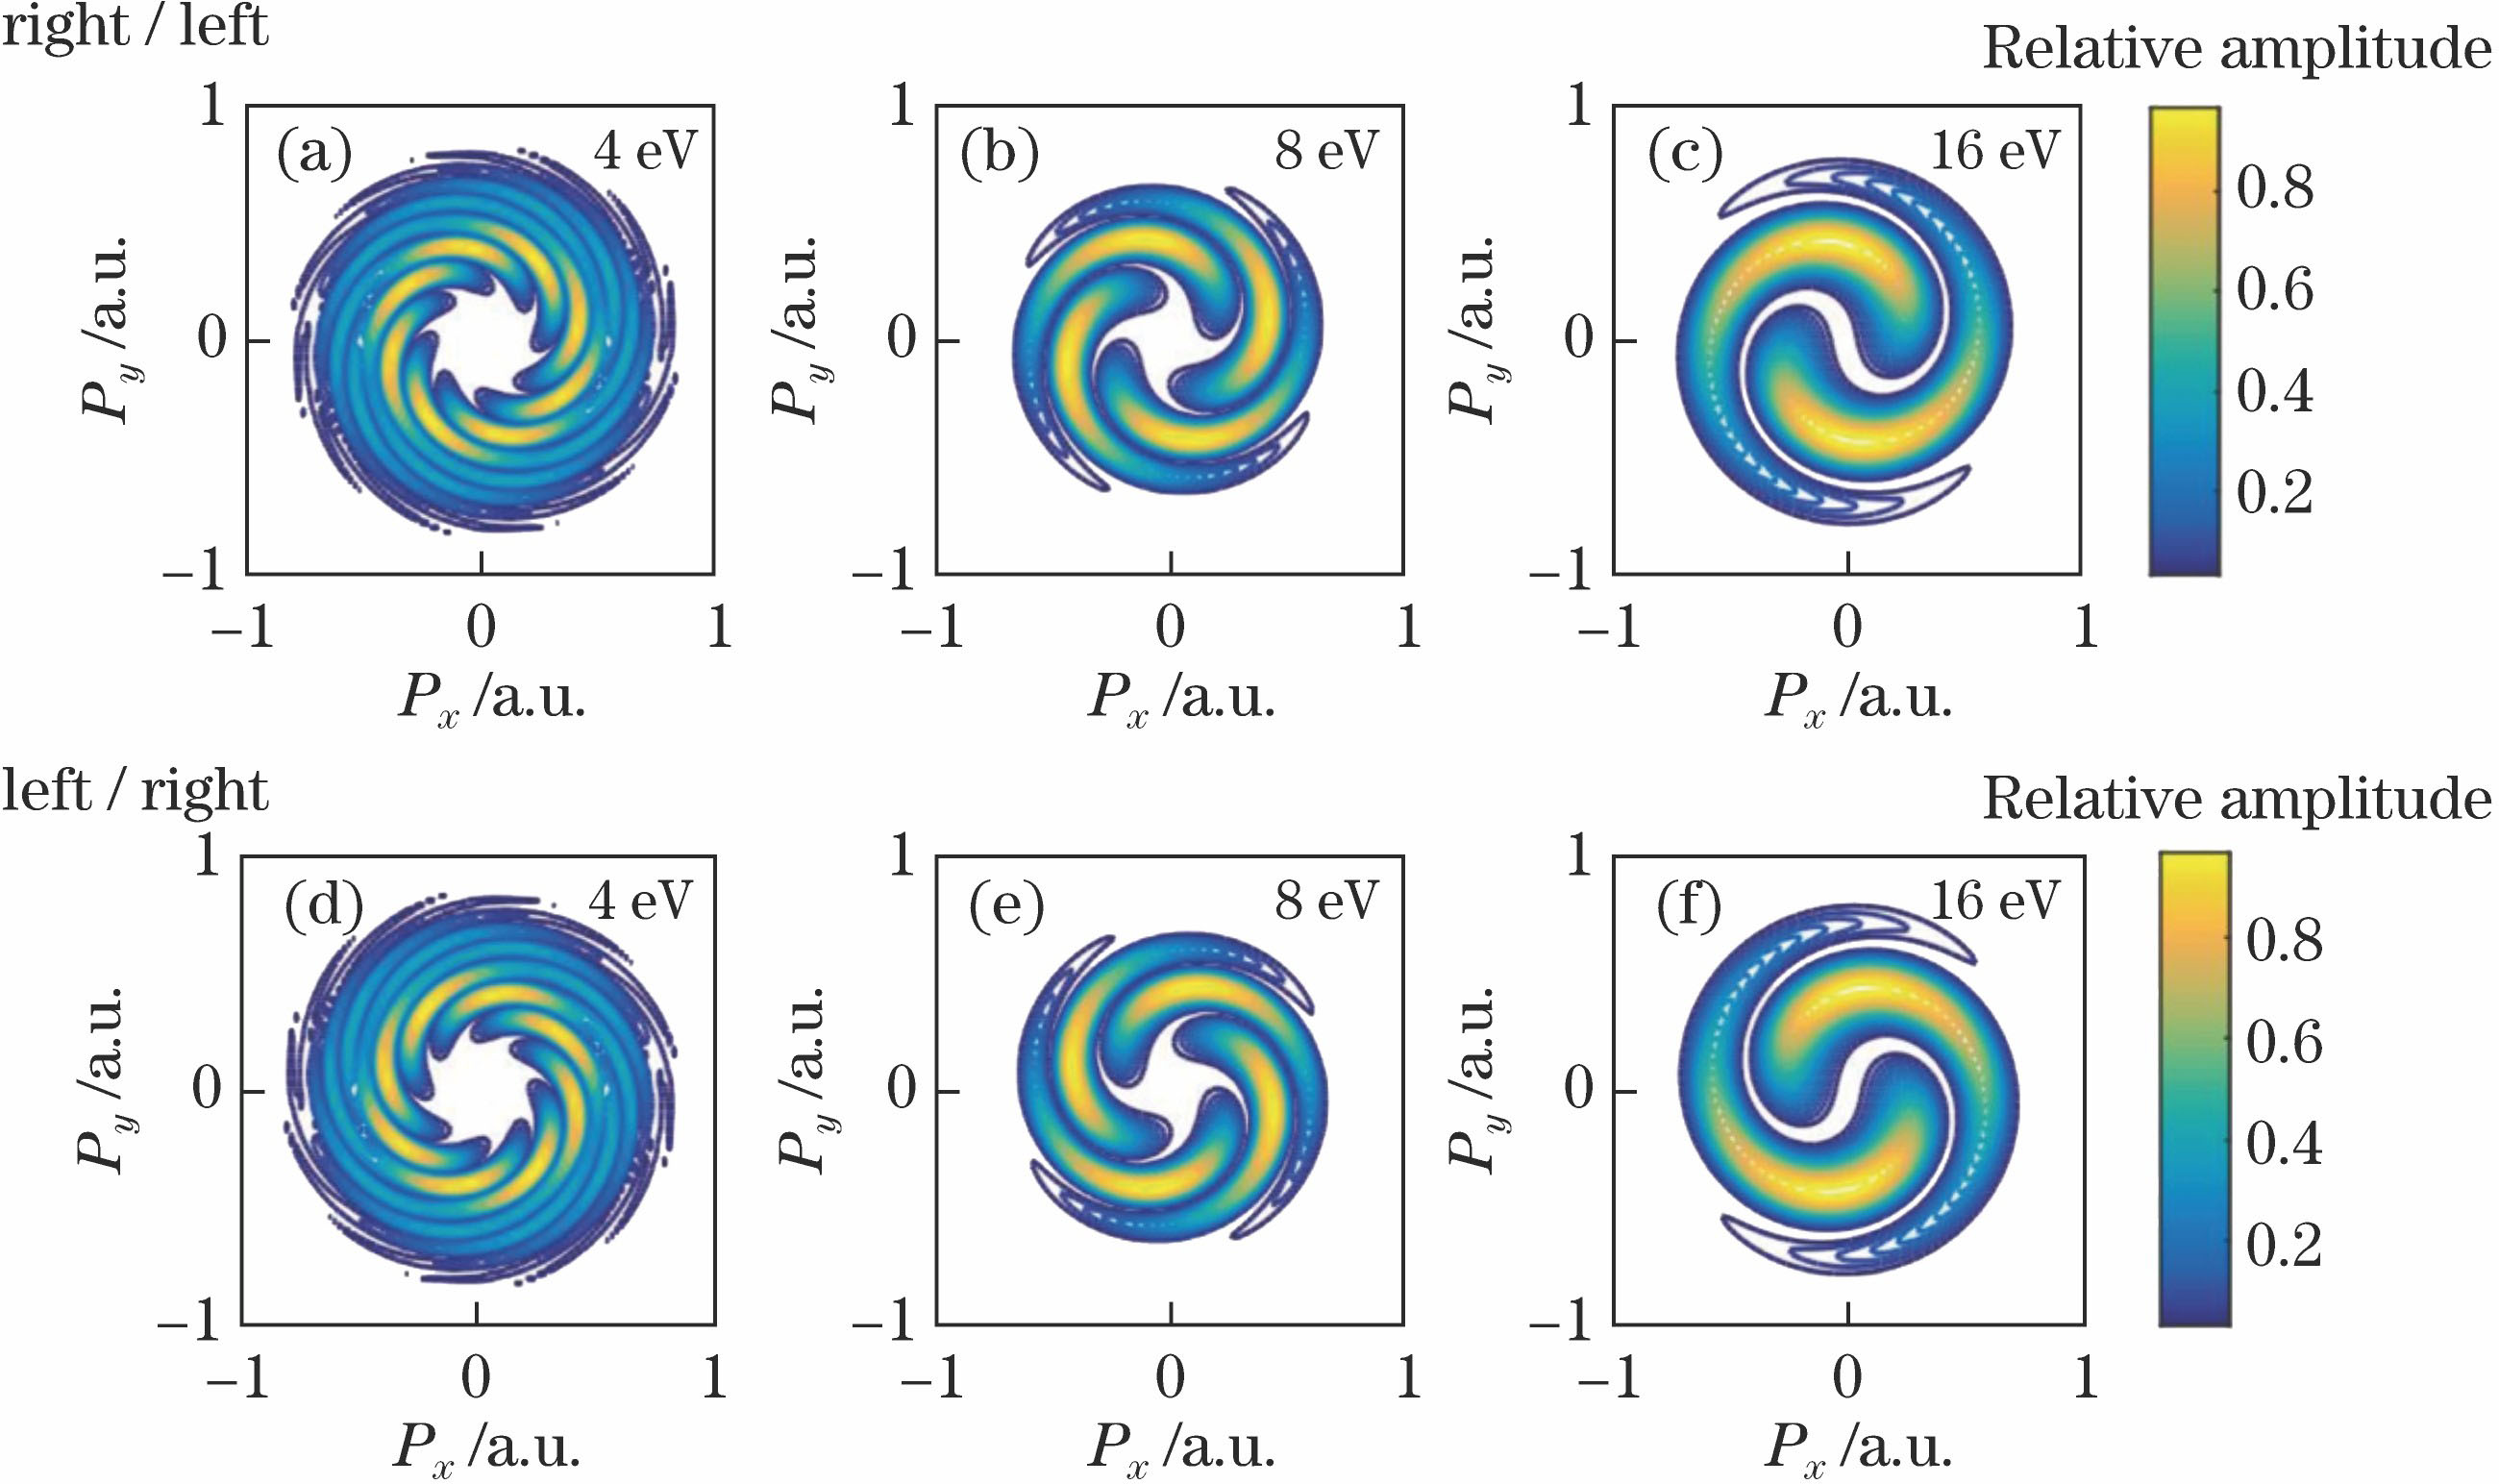 Vortex-shaped momentum distributions of hydrogen atom. (a)-(c) ‘Right/left’ polarization for two time-delayed pulses (first is right circularly polarized and second is left circularly polarized); (d)-(f) ‘left/right’ polarization for two time-delayed pulses